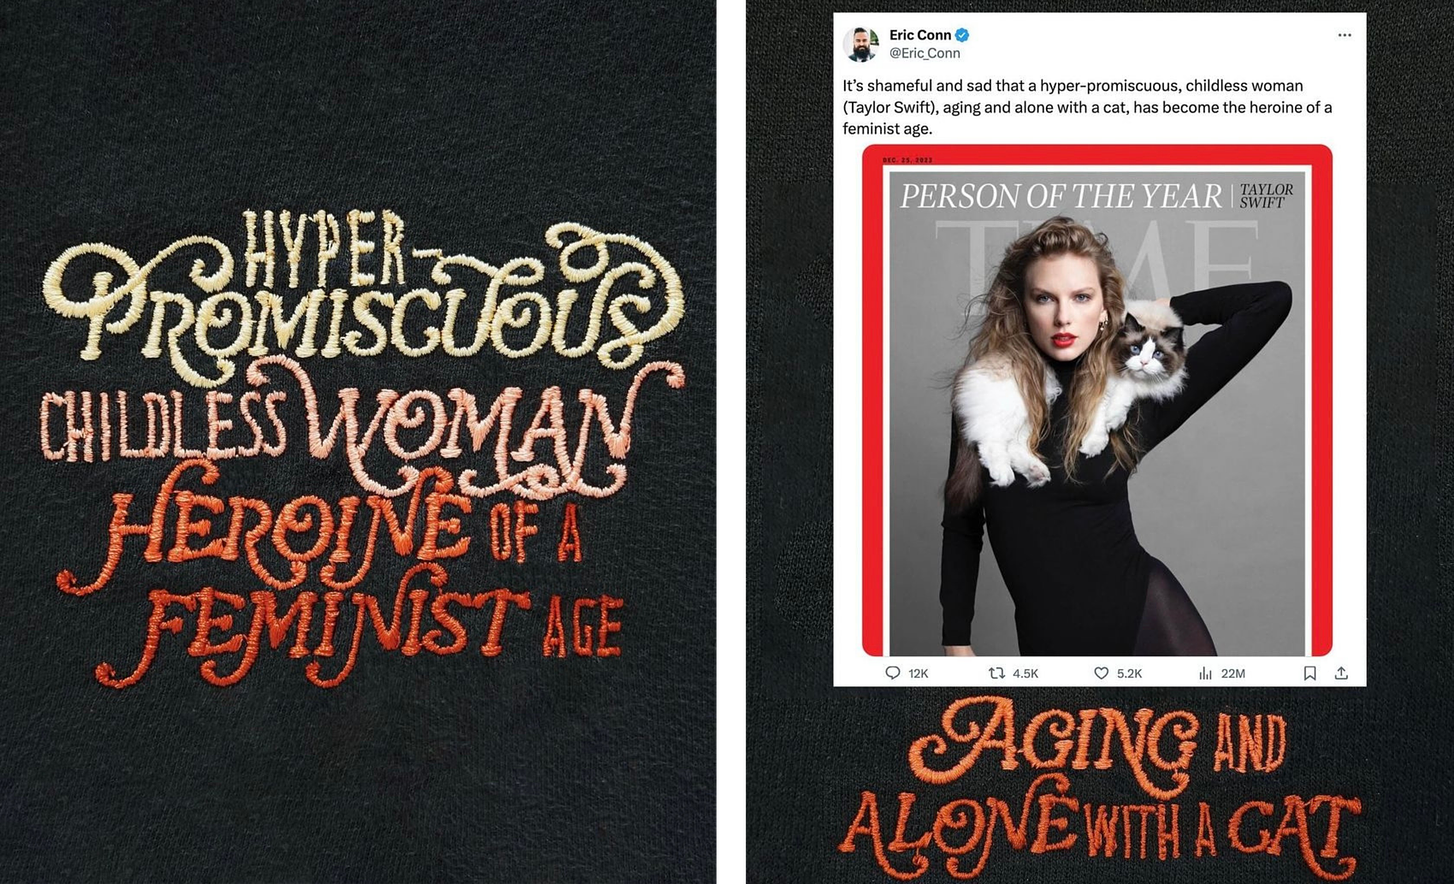 Left, a close up of embroidery on a black t-shirt. The embroidery reads "hyper-promiscuous childless woman heroine of a feminist age." Right, a screenshot of a tweet by @ Eric_Conn that features Taylor Swift's Time Magazine Person of the Year cover in which she poses with her cat. Eric's tweet reads, "It's shameful and sad that a hyper-promiscuous, childless woman (Taylor Swift), aging and alone with a cat, has become the heroine of the feminist age." Under the tweet is another close up of the t-shirt, but this version replaces "heroine of the feminist age" with "aging and alone with a cat."